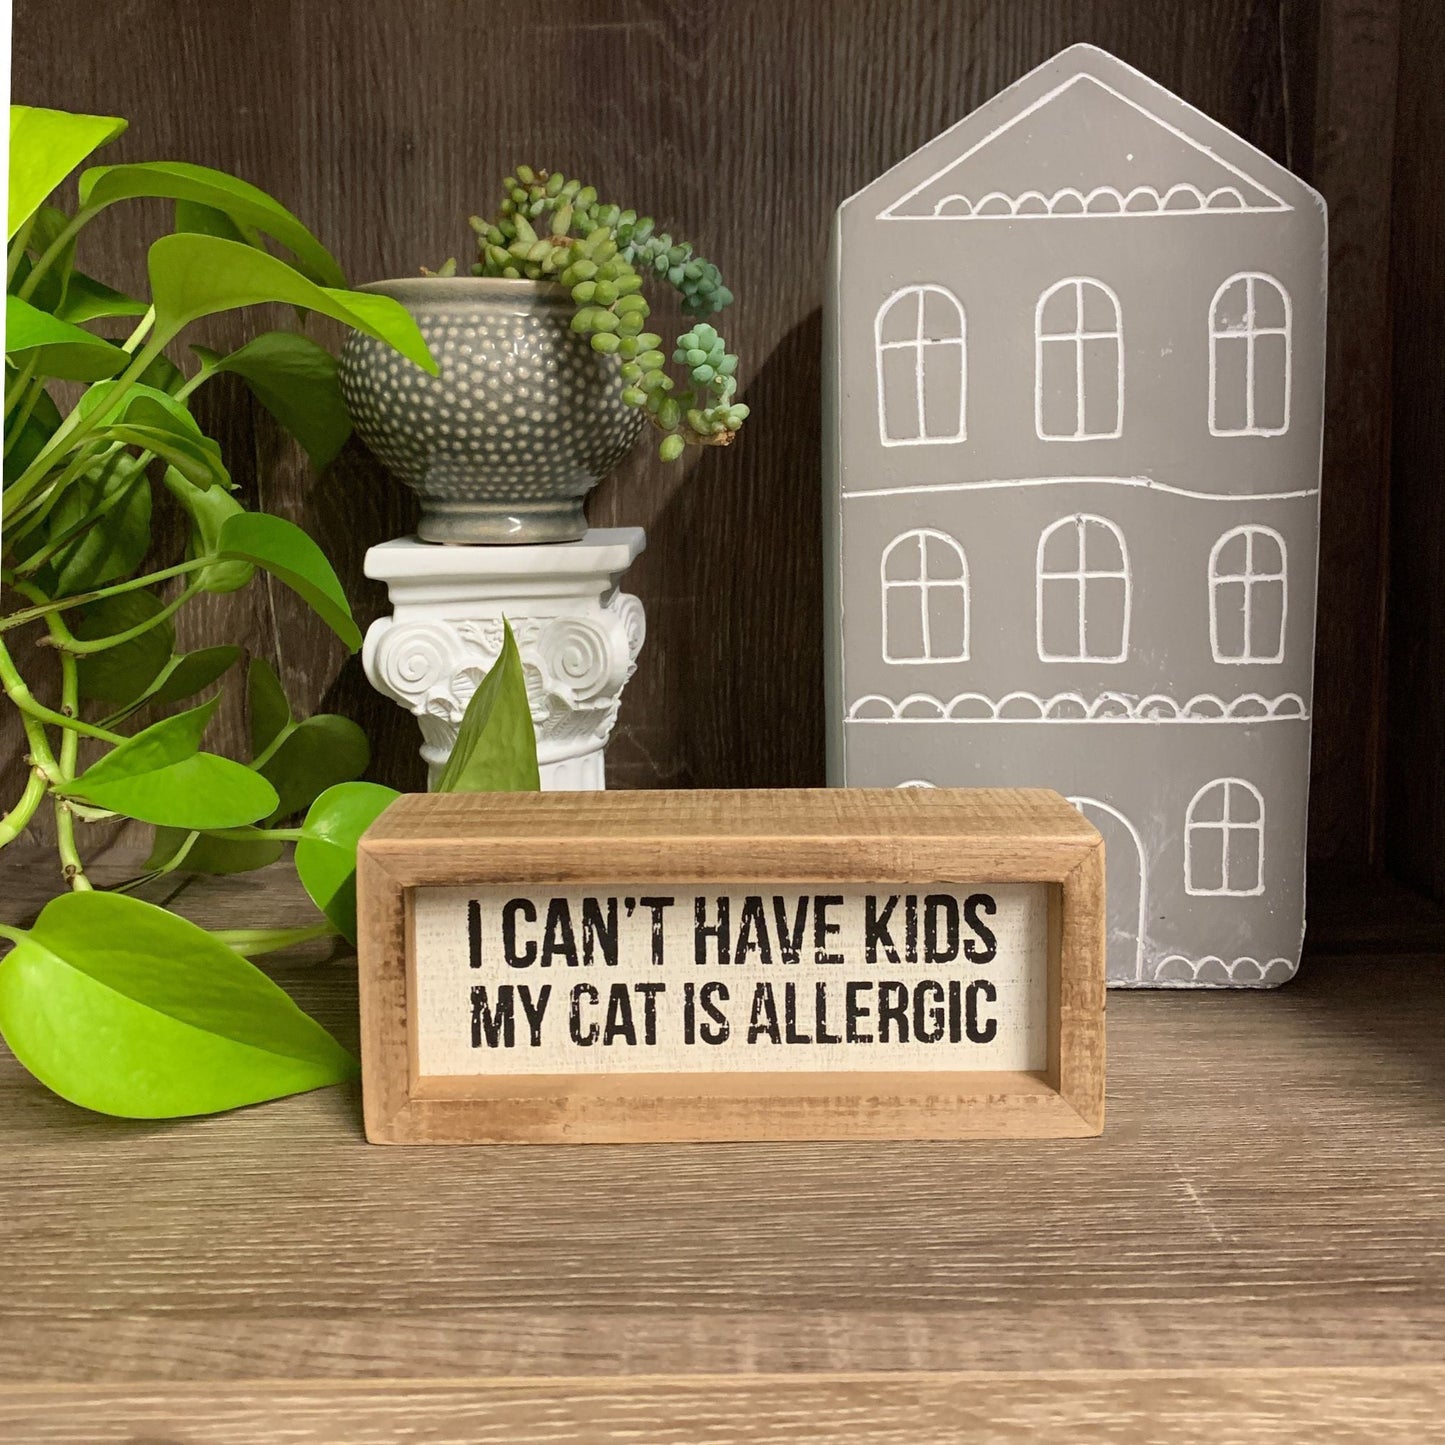 I Can't Have Kids - My Cat Is Allergic Inset Wooden Box Sign | Funny Home Door Decor | 6" x 2.50"